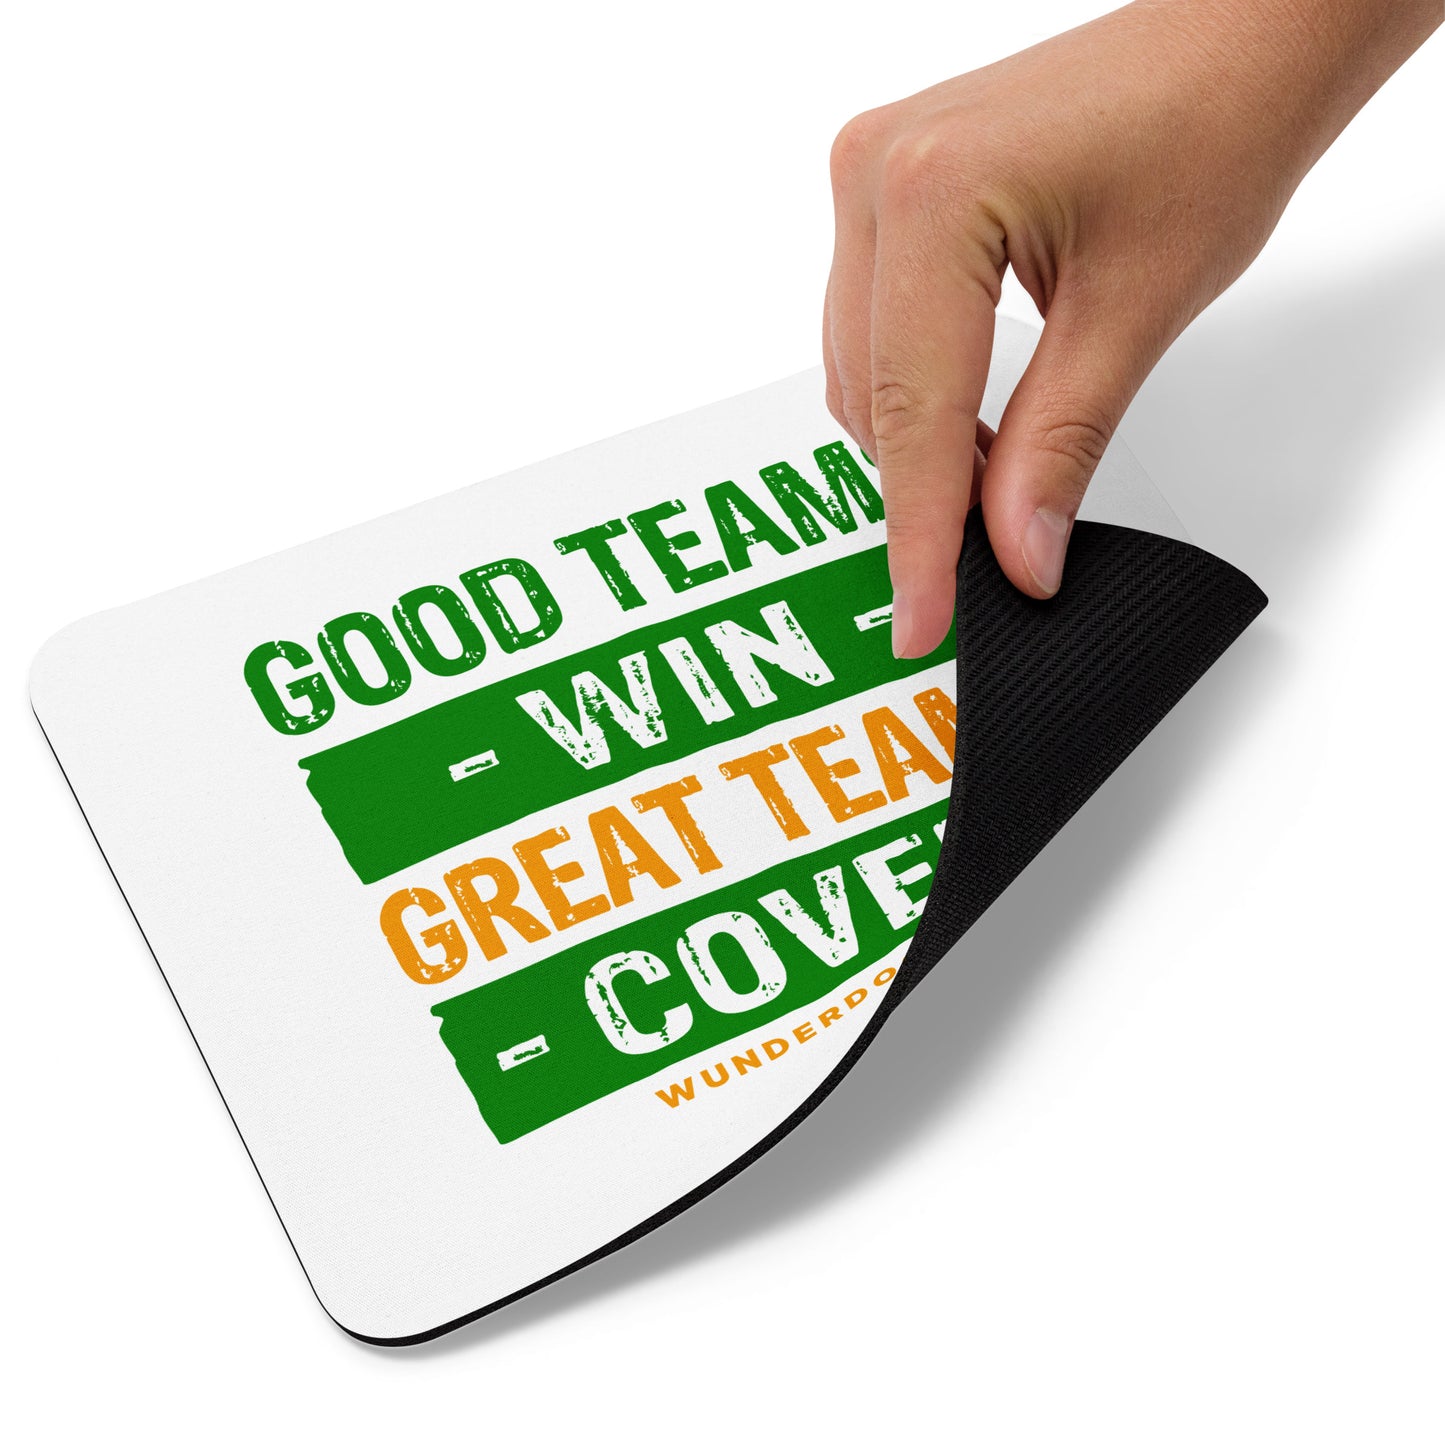 Great Teams Cover Mouse Pad